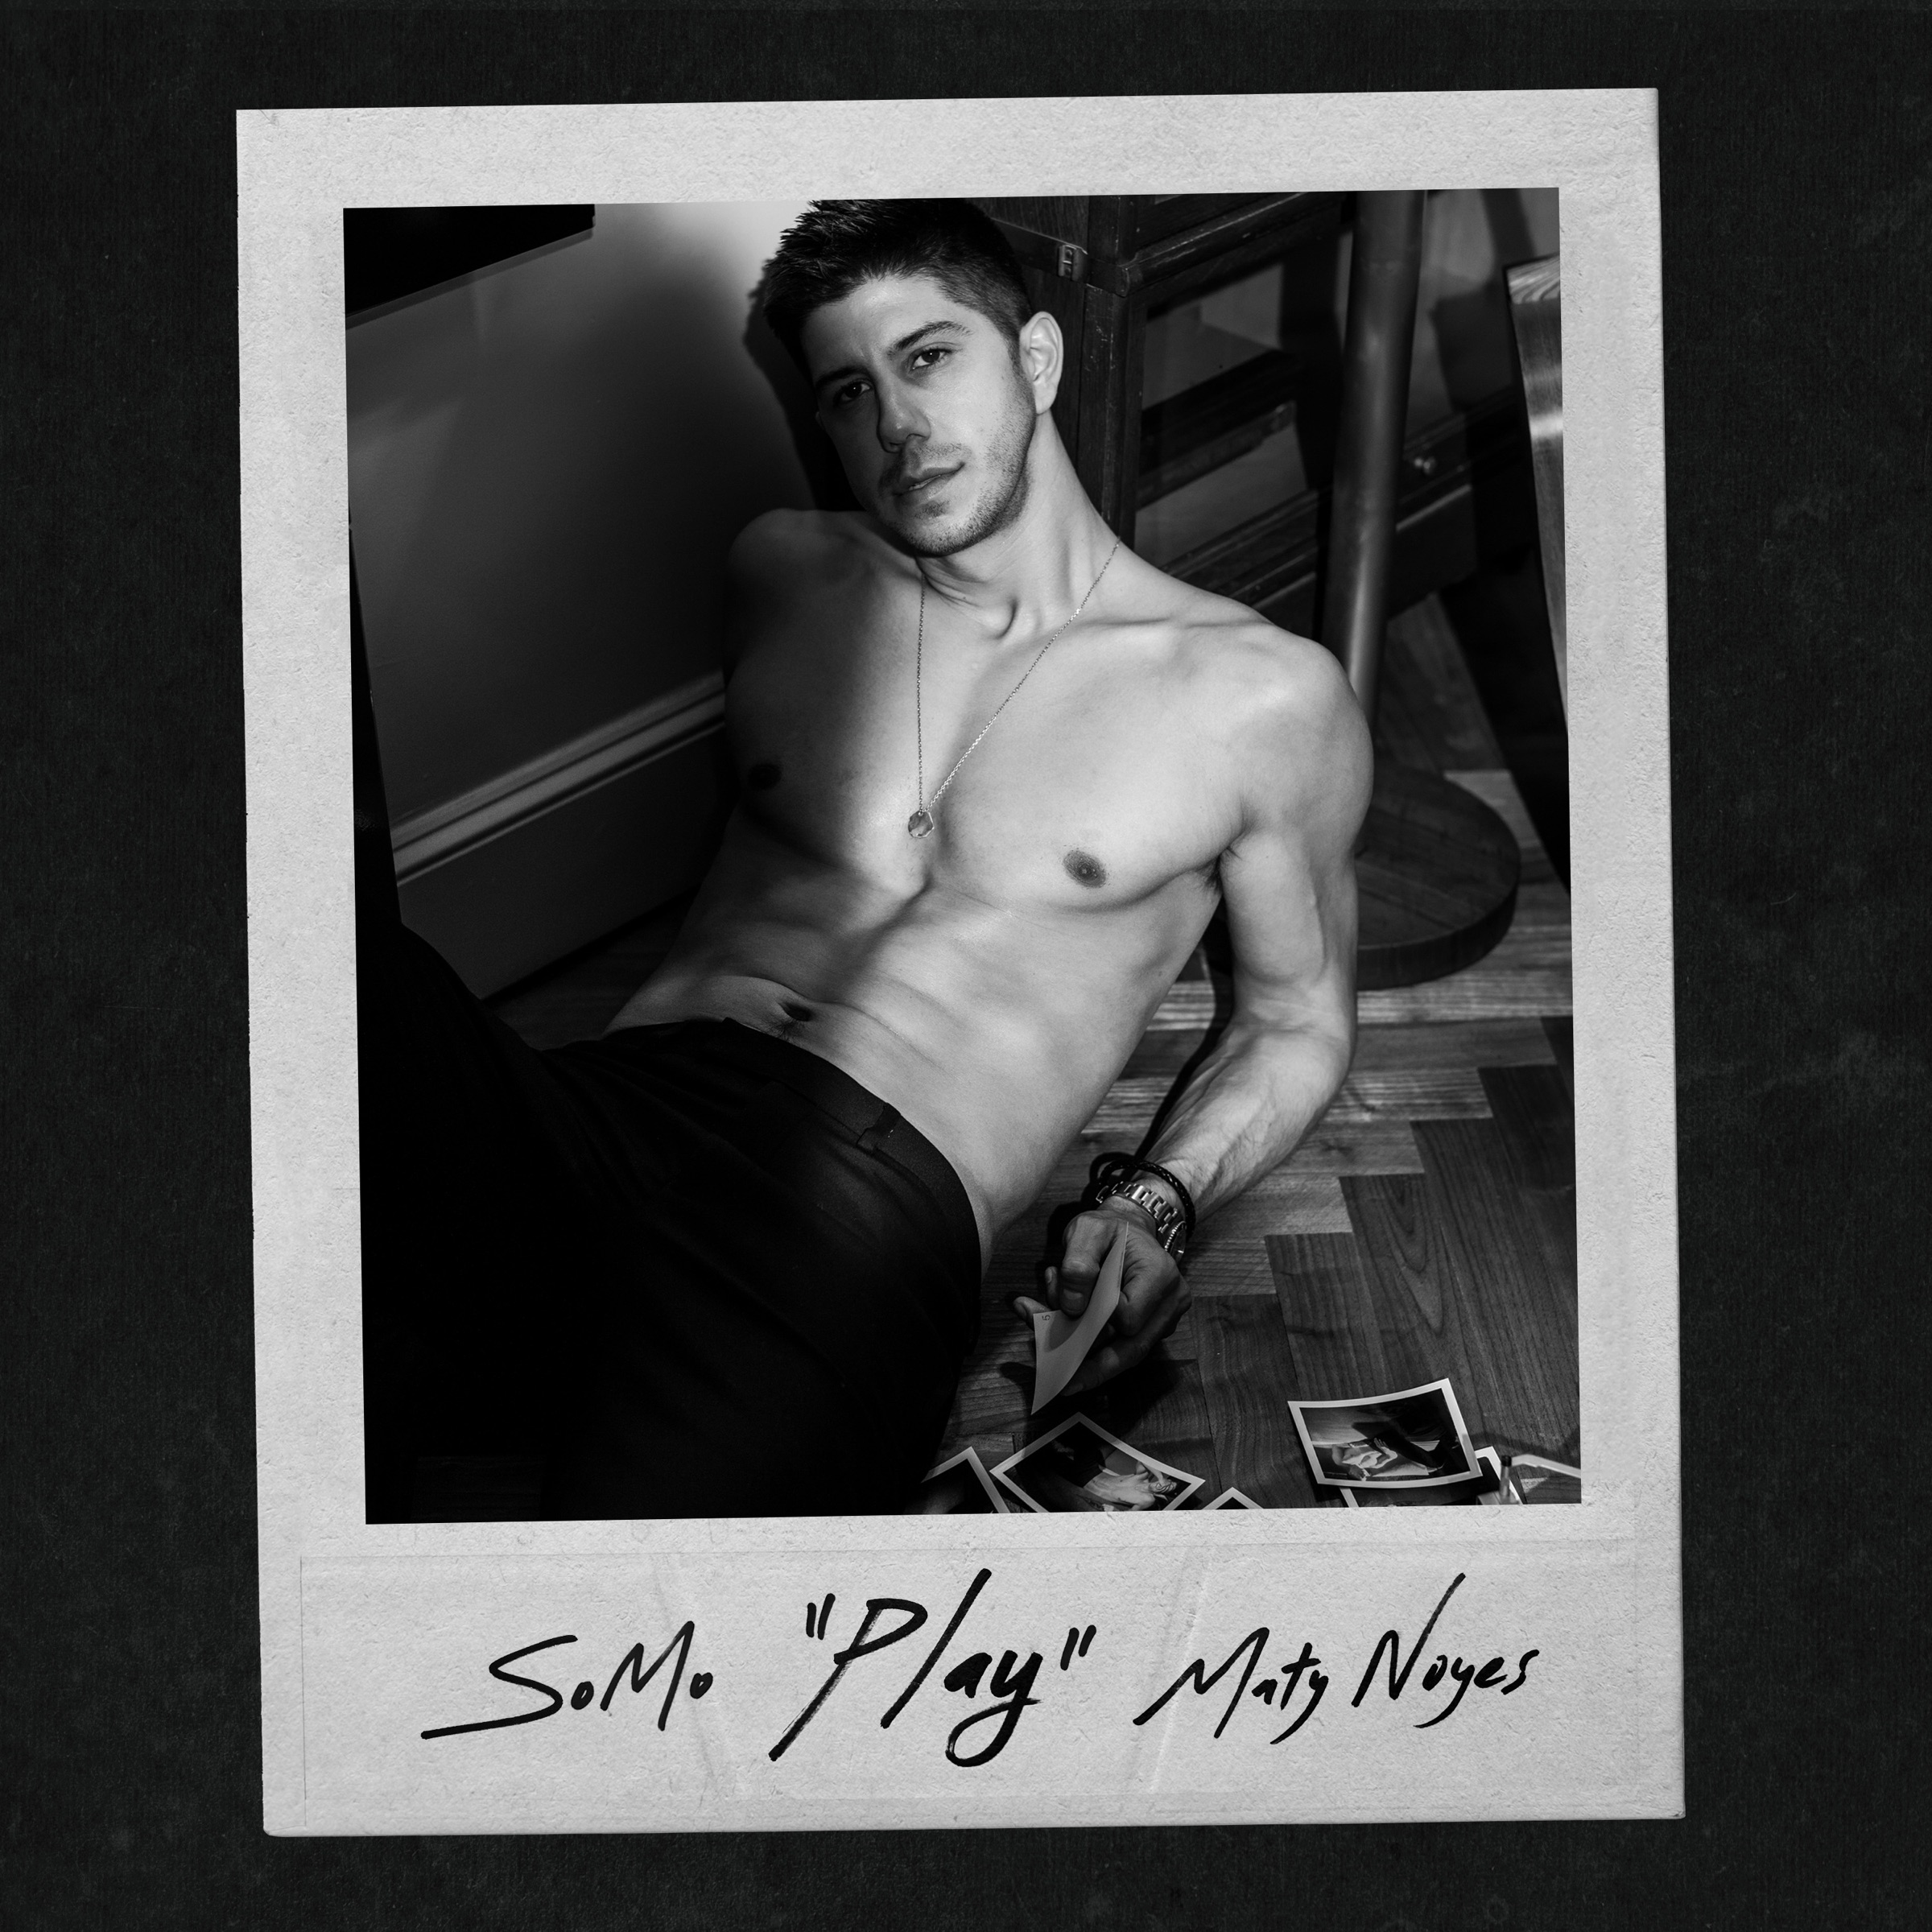 SoMo ft. featuring Maty Noyes Play cover artwork